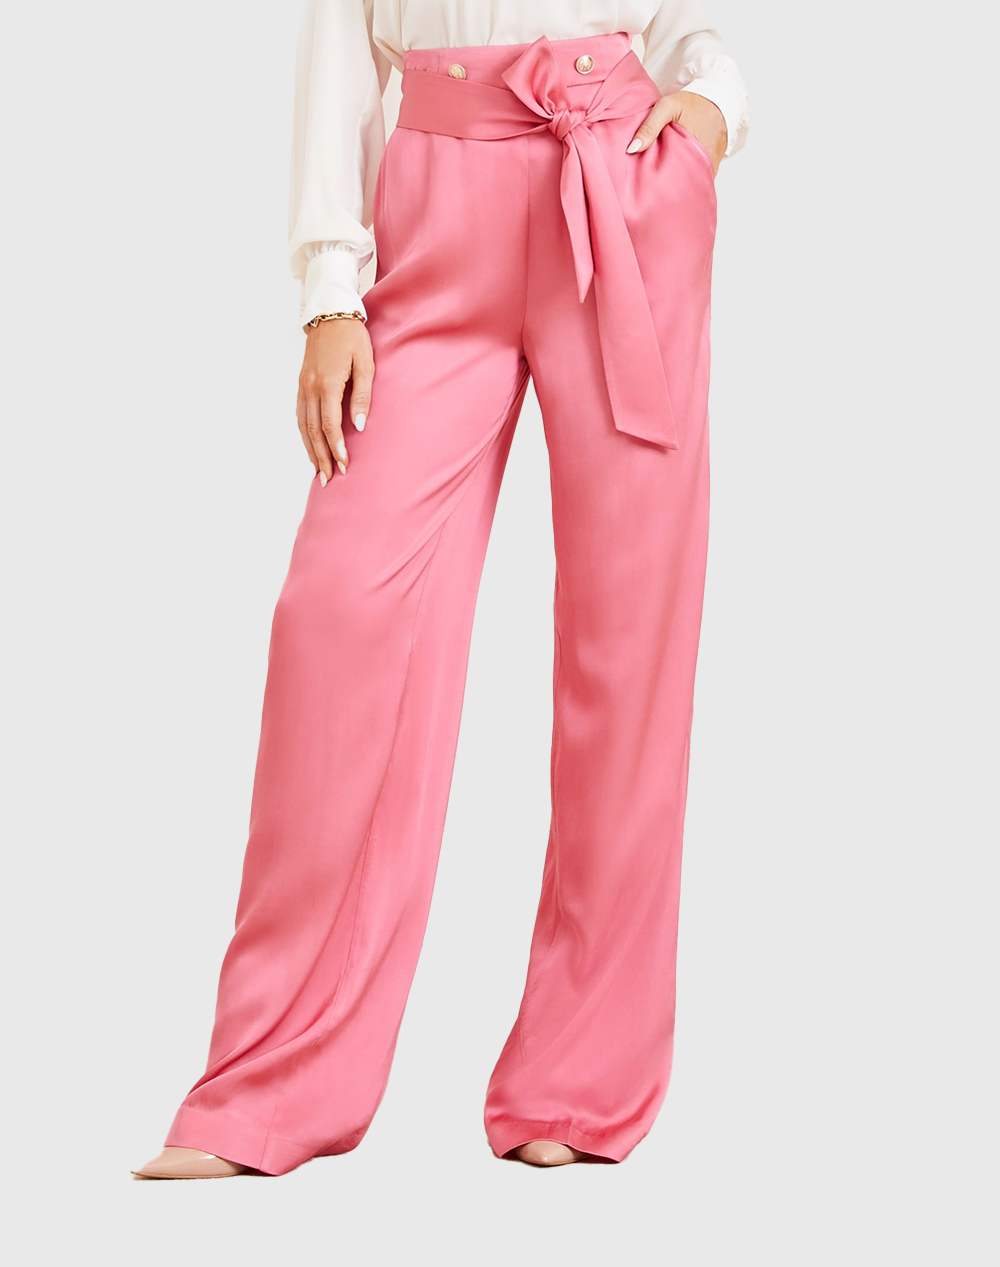 GUESS MARCIANO ANASTASIA PANT ΠΑΝΤΕΛΟΝΙ ΓΥΝΑΙΚΕΙΟ 4RGB039999Z-G65P Pink 3810AGMAR2000001_XR21848